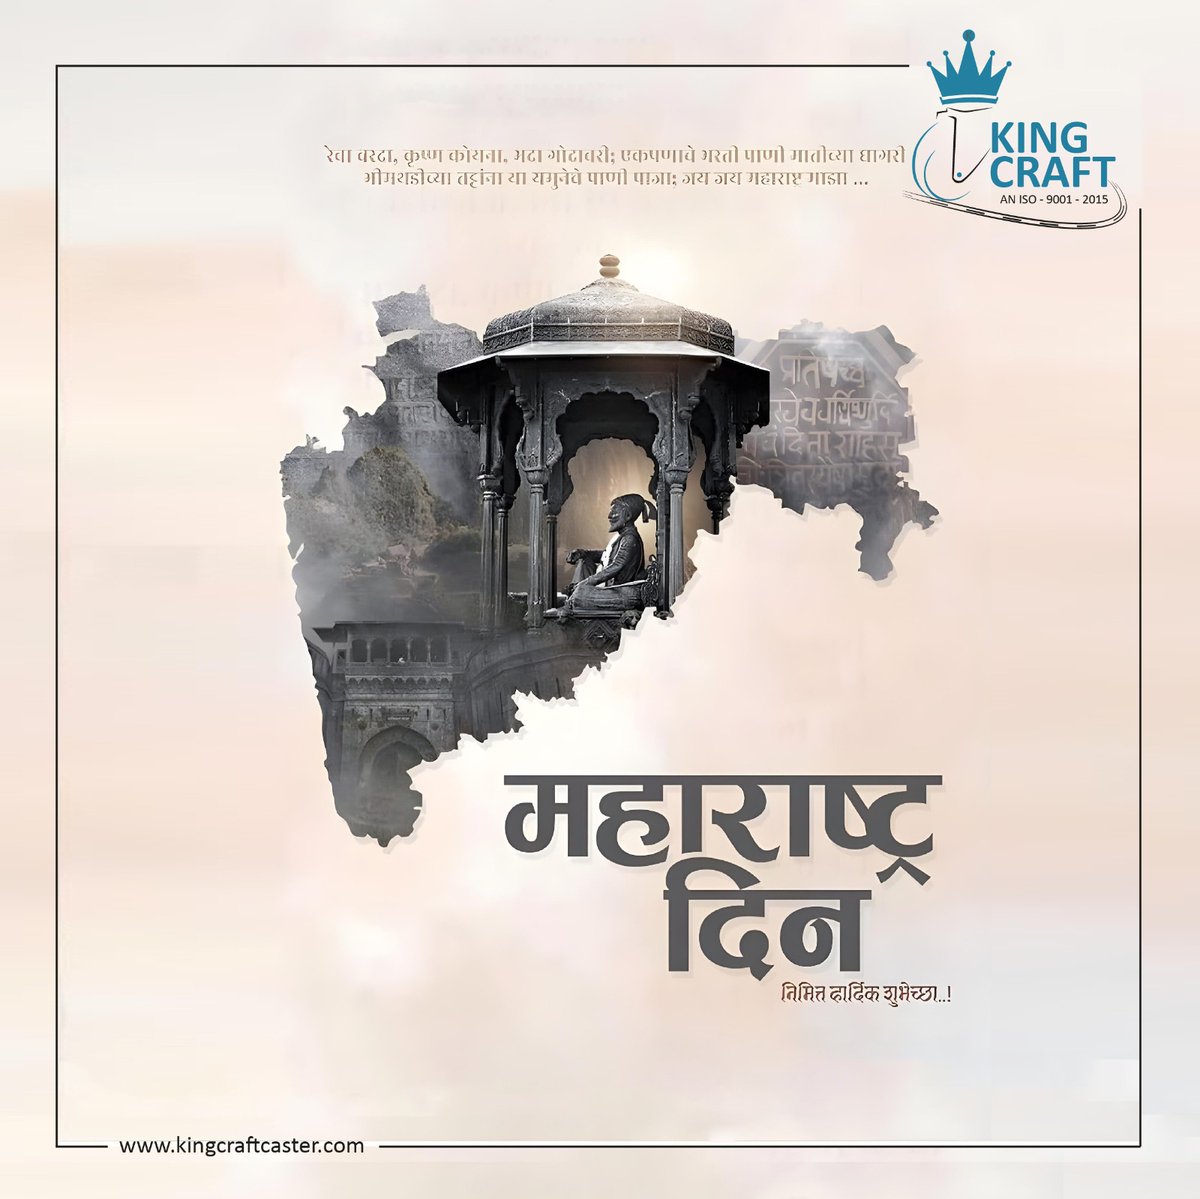 On Maharashtra Day, let's salute the rich heritage and diversity of our state, and on Labour Day, let's recognize and appreciate the contributions of every worker.

#1stmay #maharashtradivas #maharashtraday #kingcraftindustries